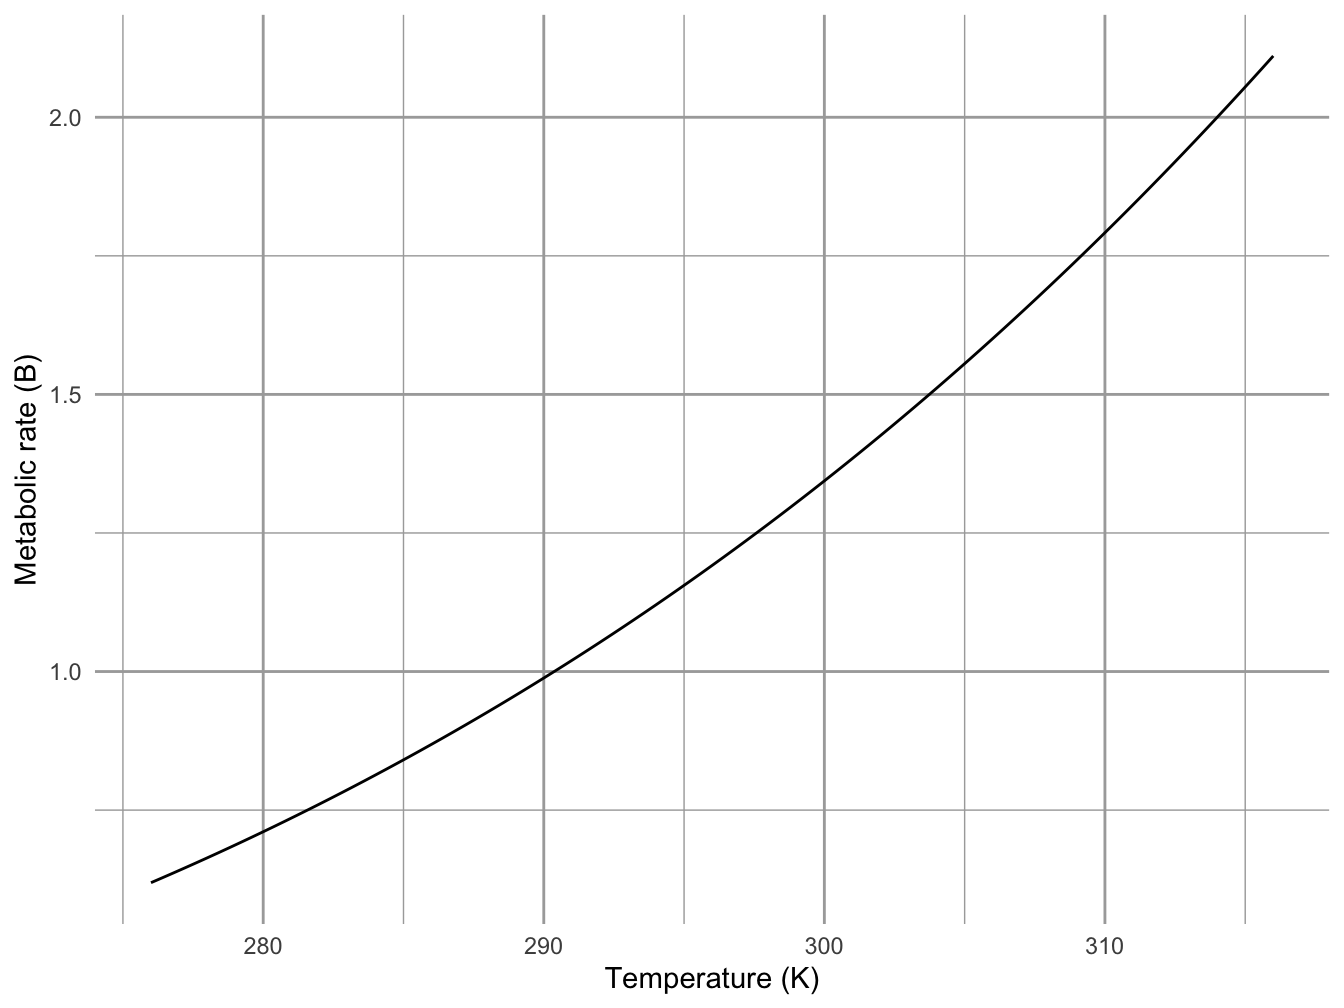 The effect of body temperature on ectothermic metabolic rates can be approximated with the Arrhenius function, $B = a e^{-E_a/(kT)}$. Here $a = 10^4$, and $E_a = 0.23$. It is similar in shape to a power law with $z > 1$, over the range of biologically relevant temperatures.